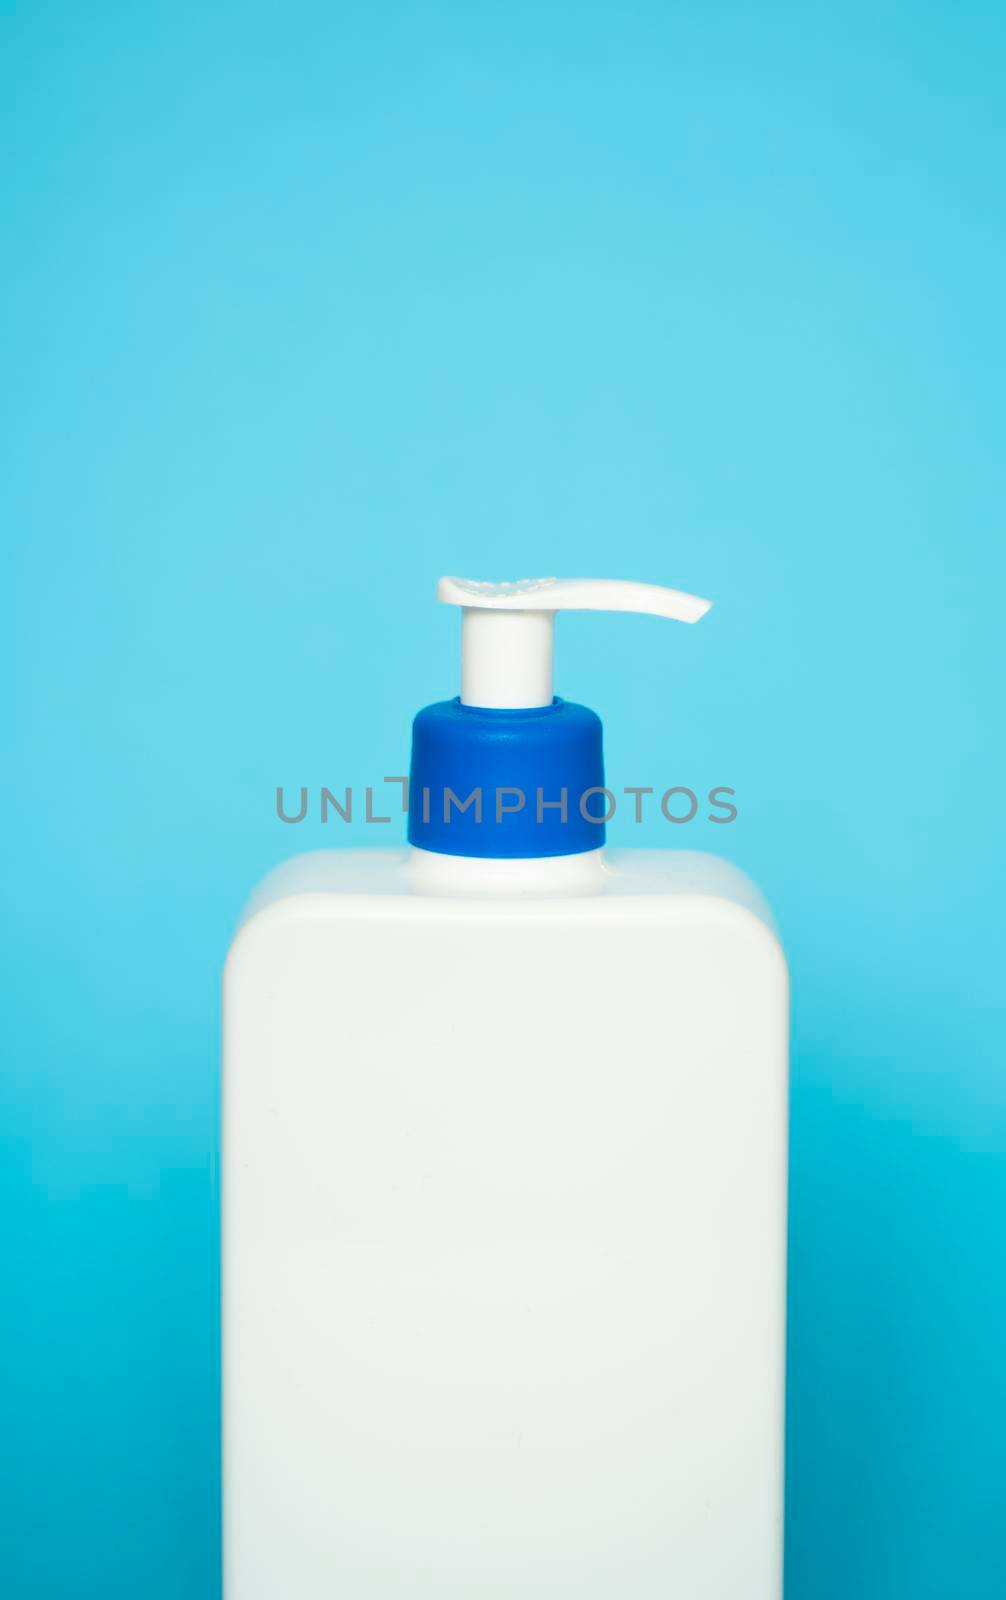 Liquid container for gel, lotion, cream, shampoo, bath foam. Cosmetic plastic bottle with blue dispenser pump on blue background. Cosmetic packaging mockup with copy space. by vovsht